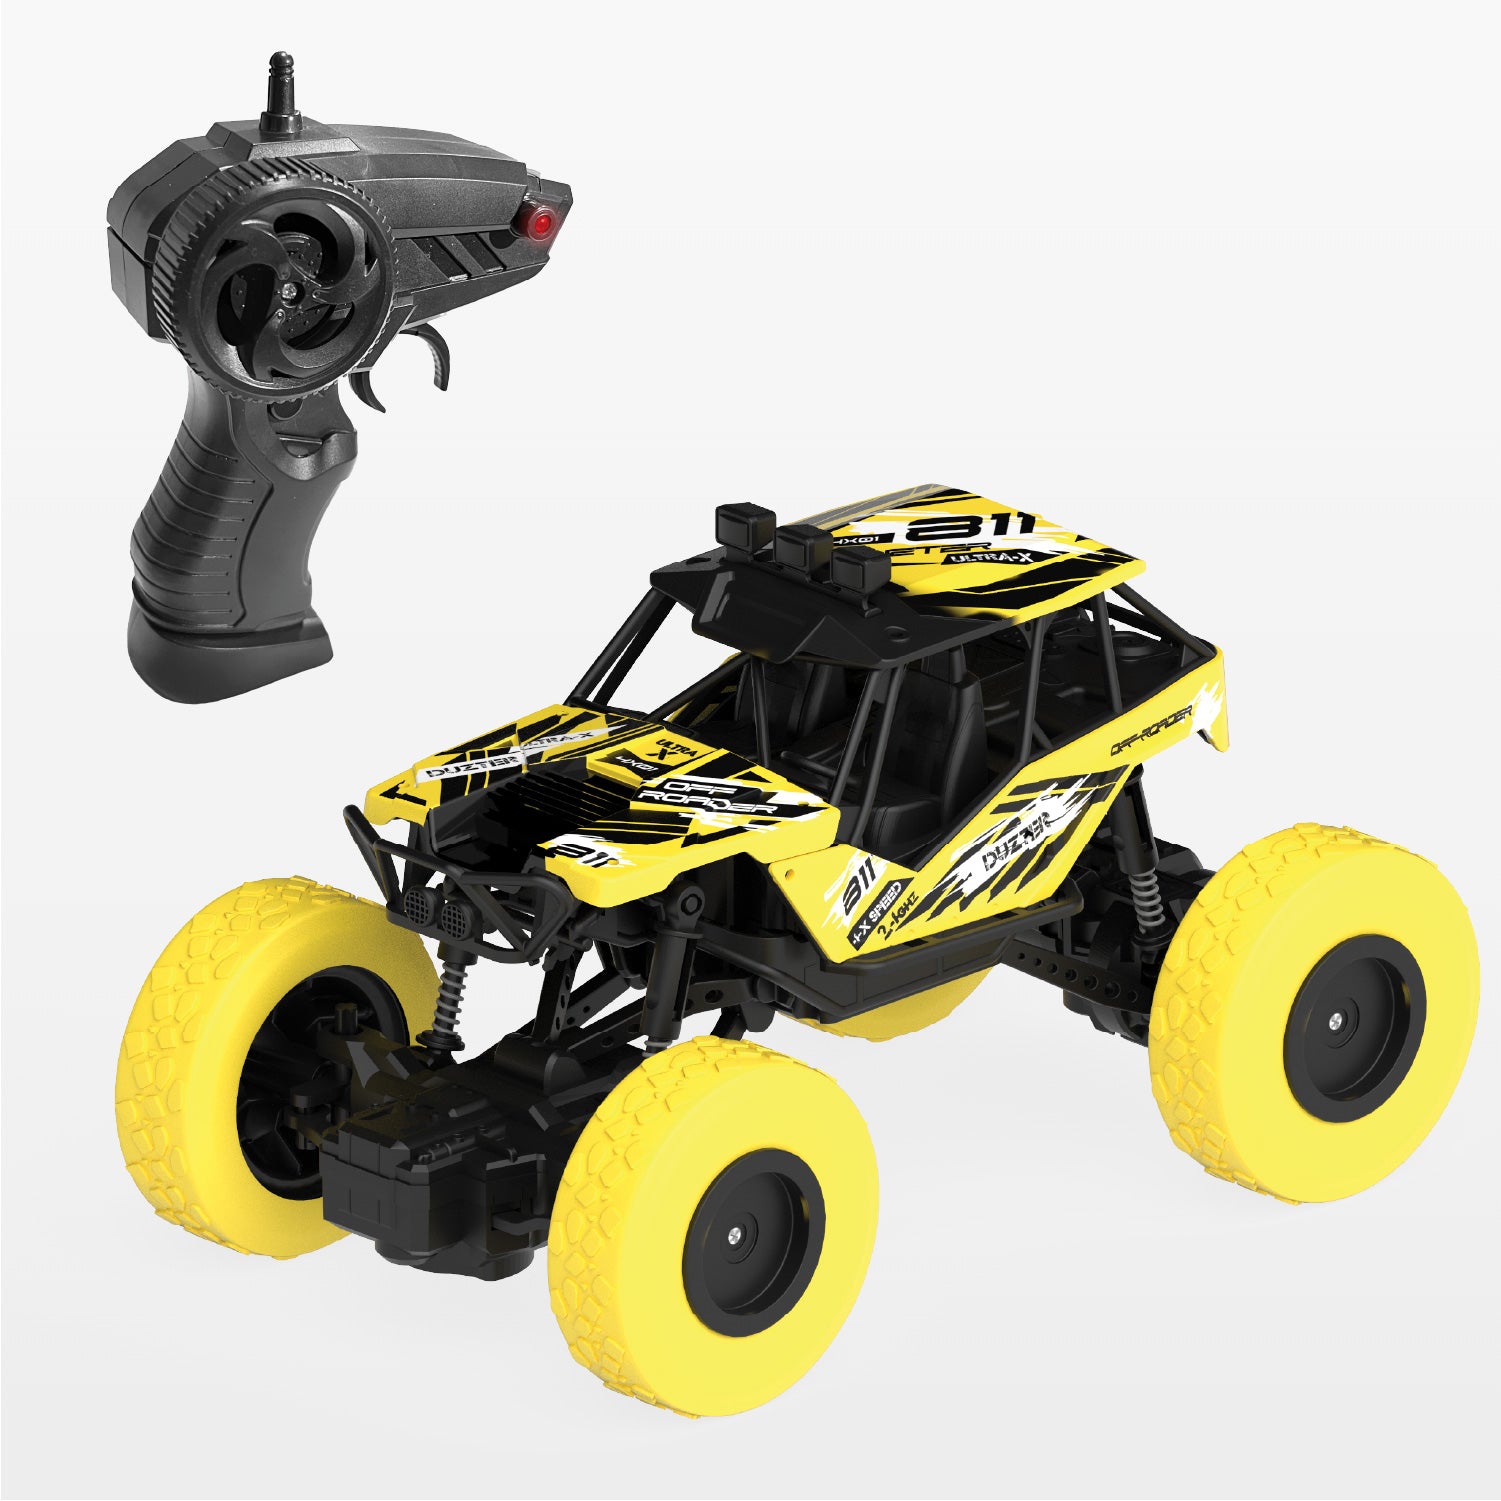 DUZTER- Remote Control Monster Truck RC Car | Off Road 2WD Rock Crawler |High Speed Racing Toy for Boys